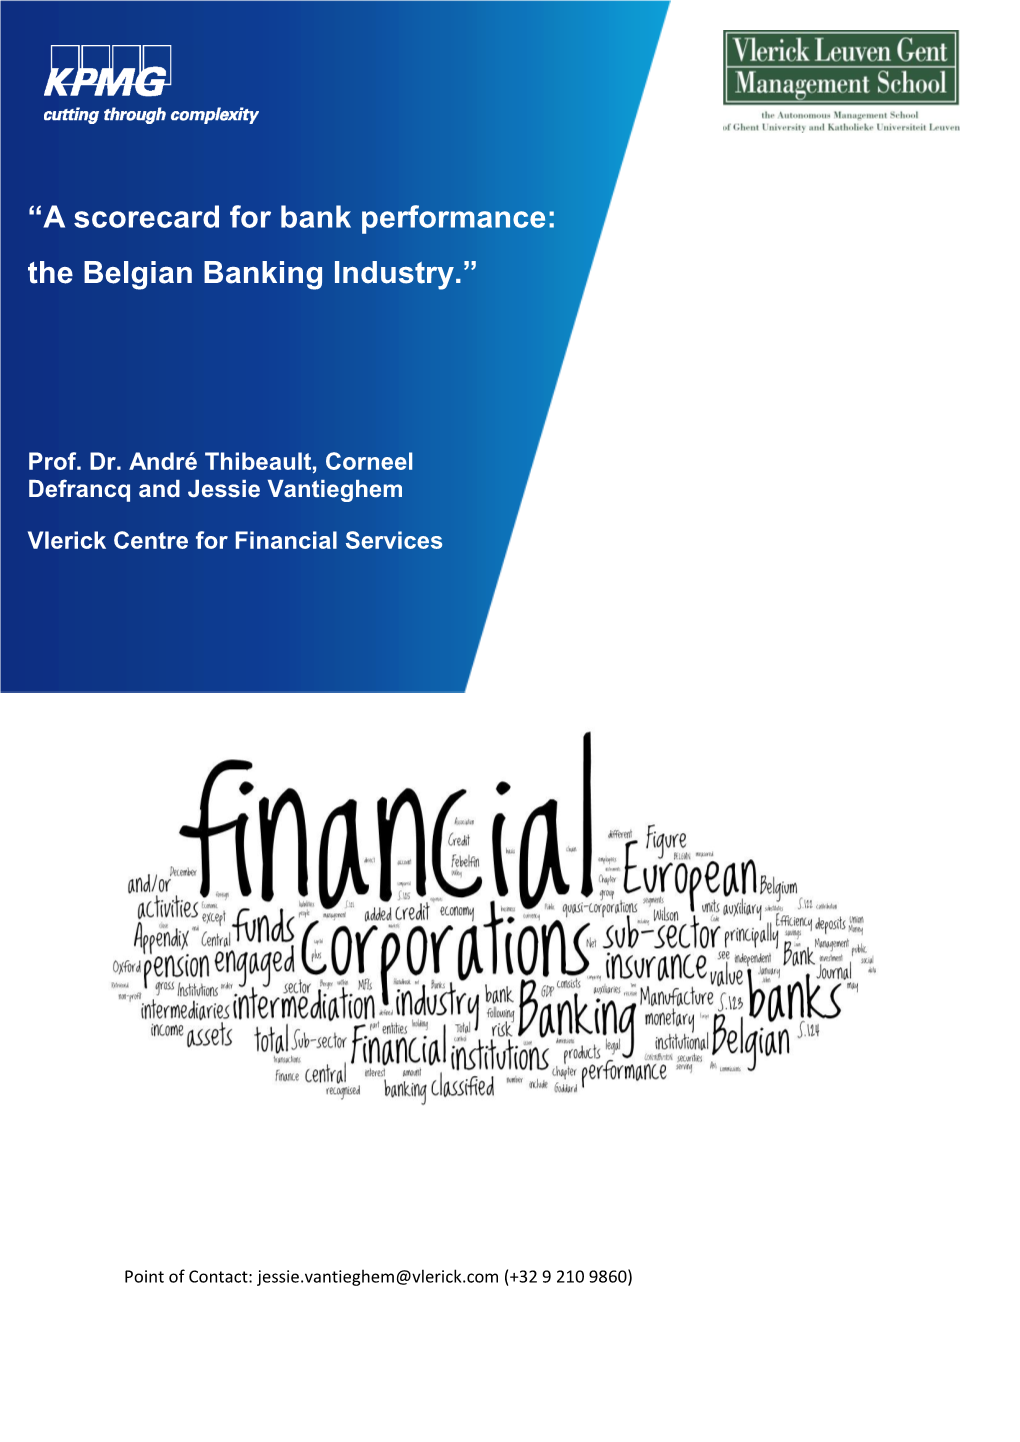 “A Scorecard for Bank Performance: the Belgian Banking Industry.”